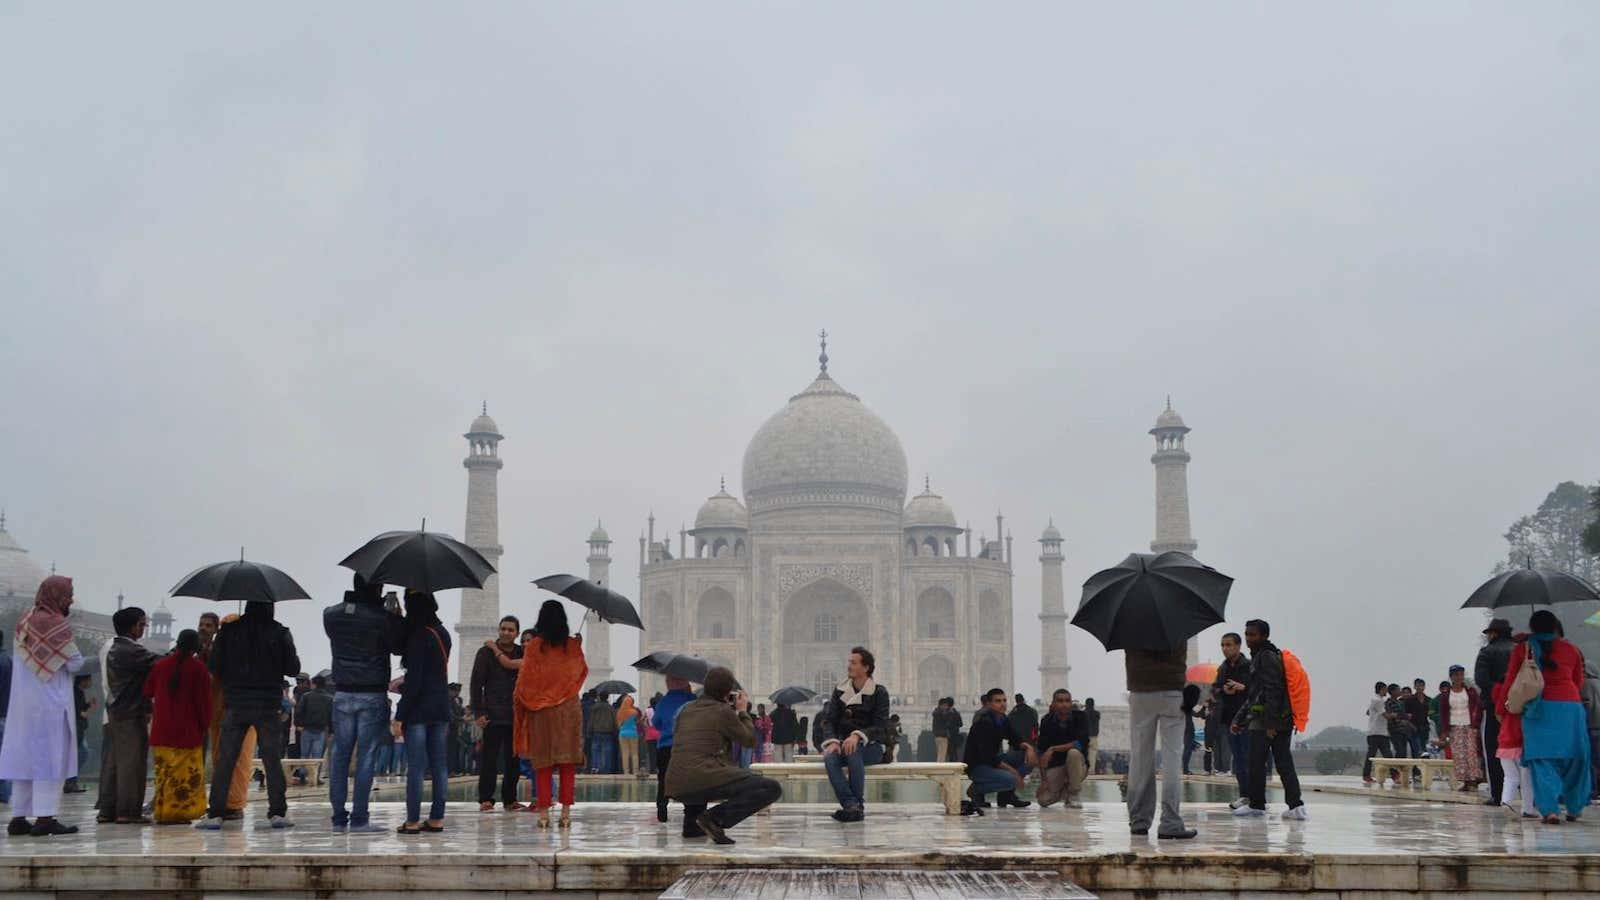 2014 will see India’s greatest number of foreign tourists yet.